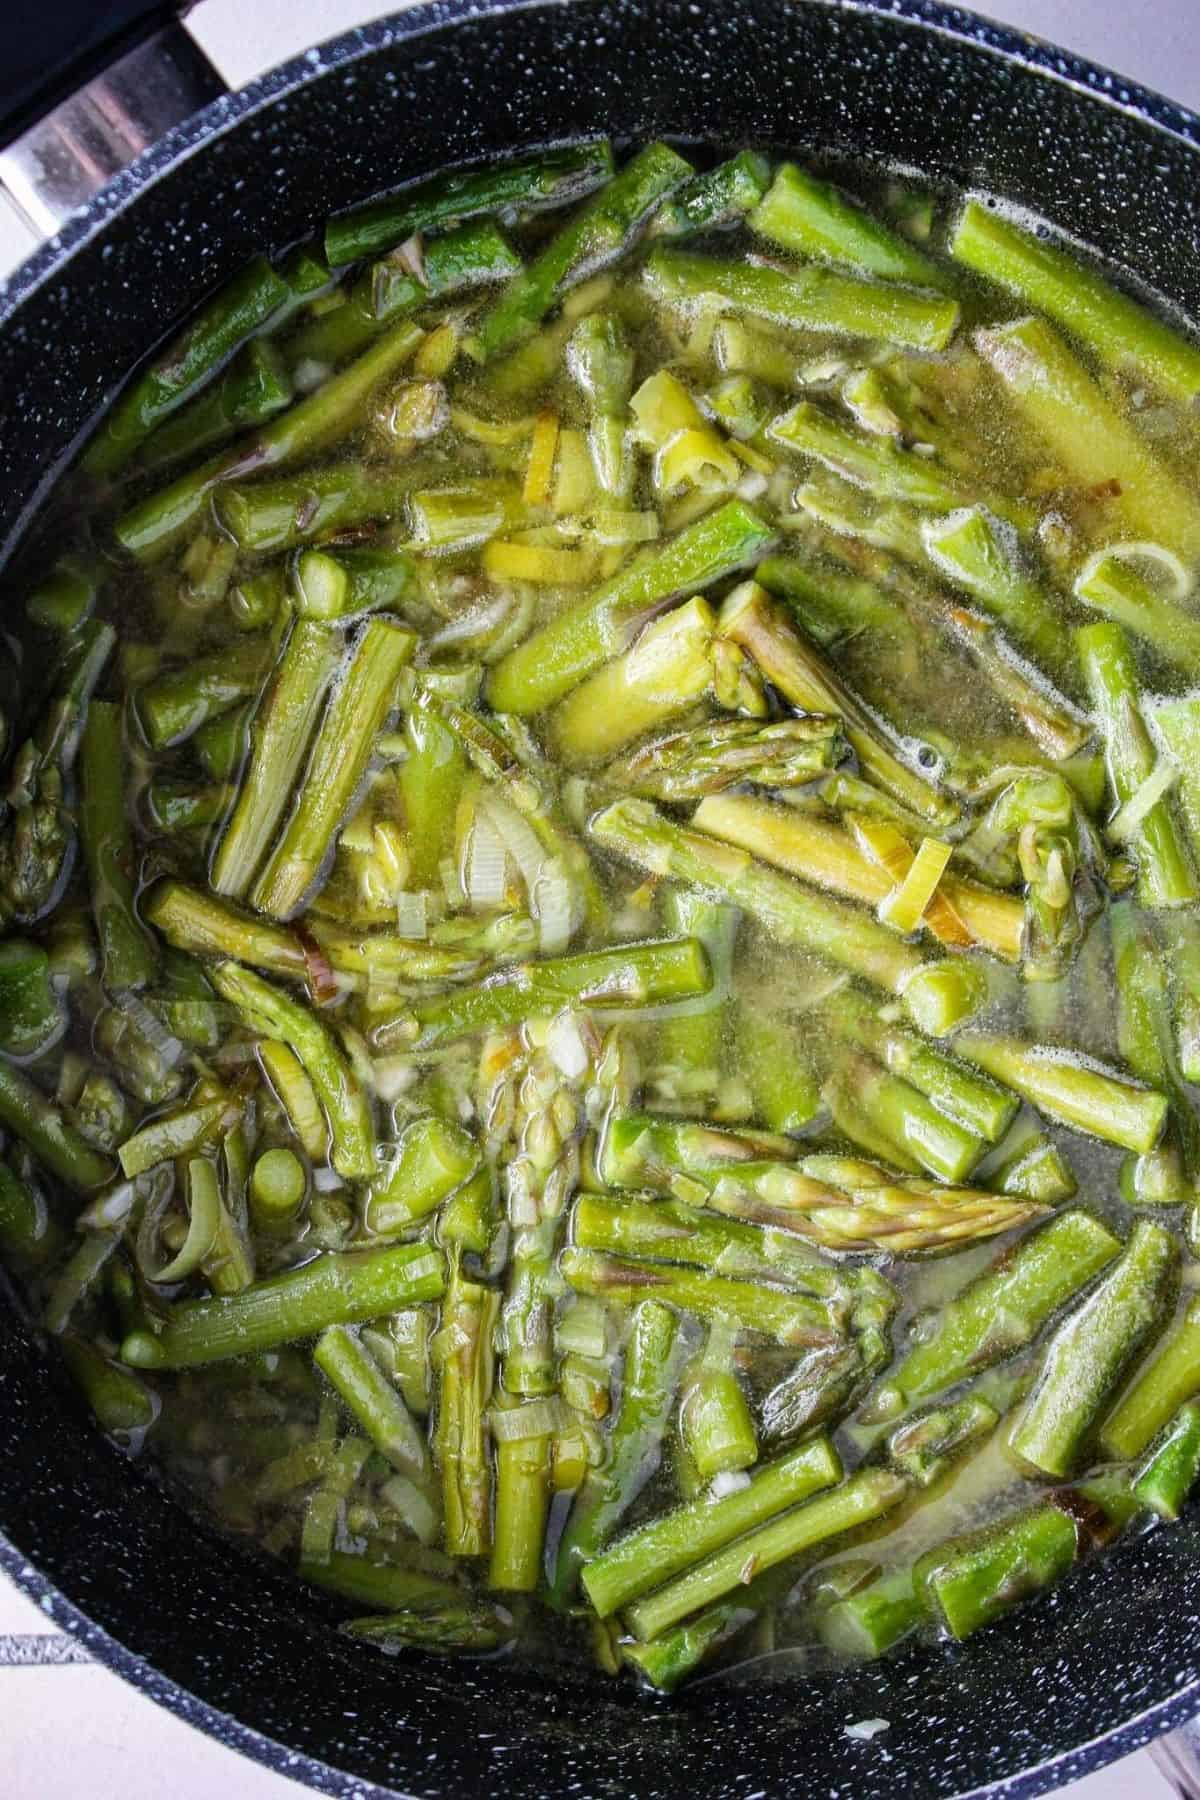 Asparagus and leeks boiling in broth.